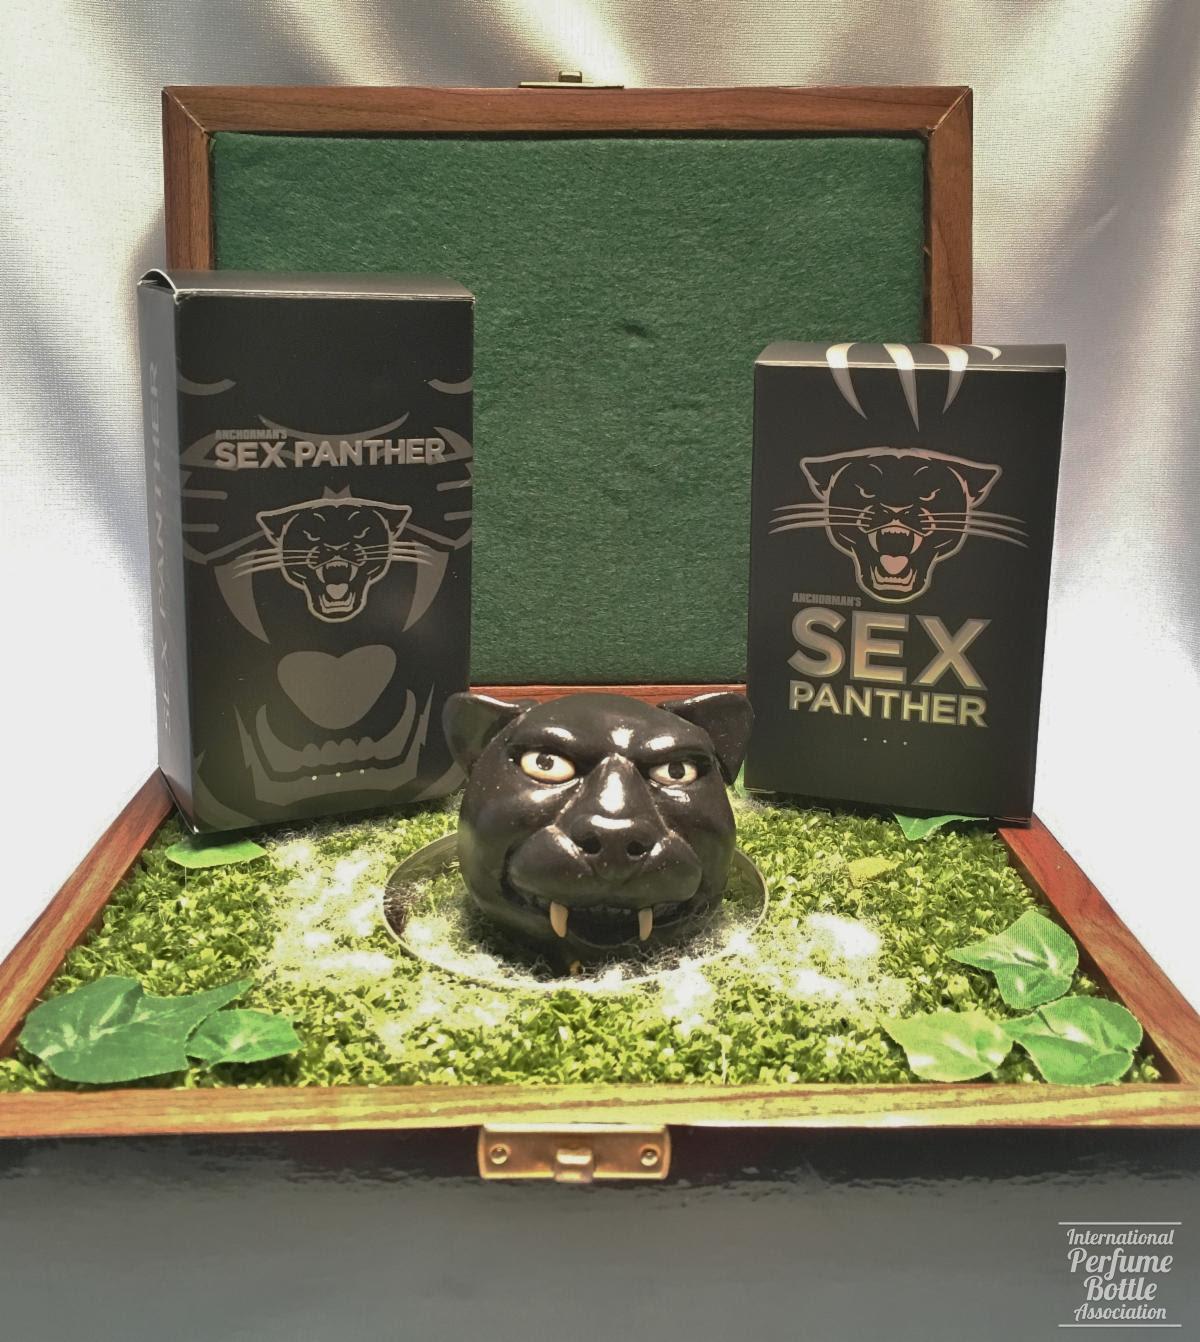 "Sex Panther" by Anchorman Display